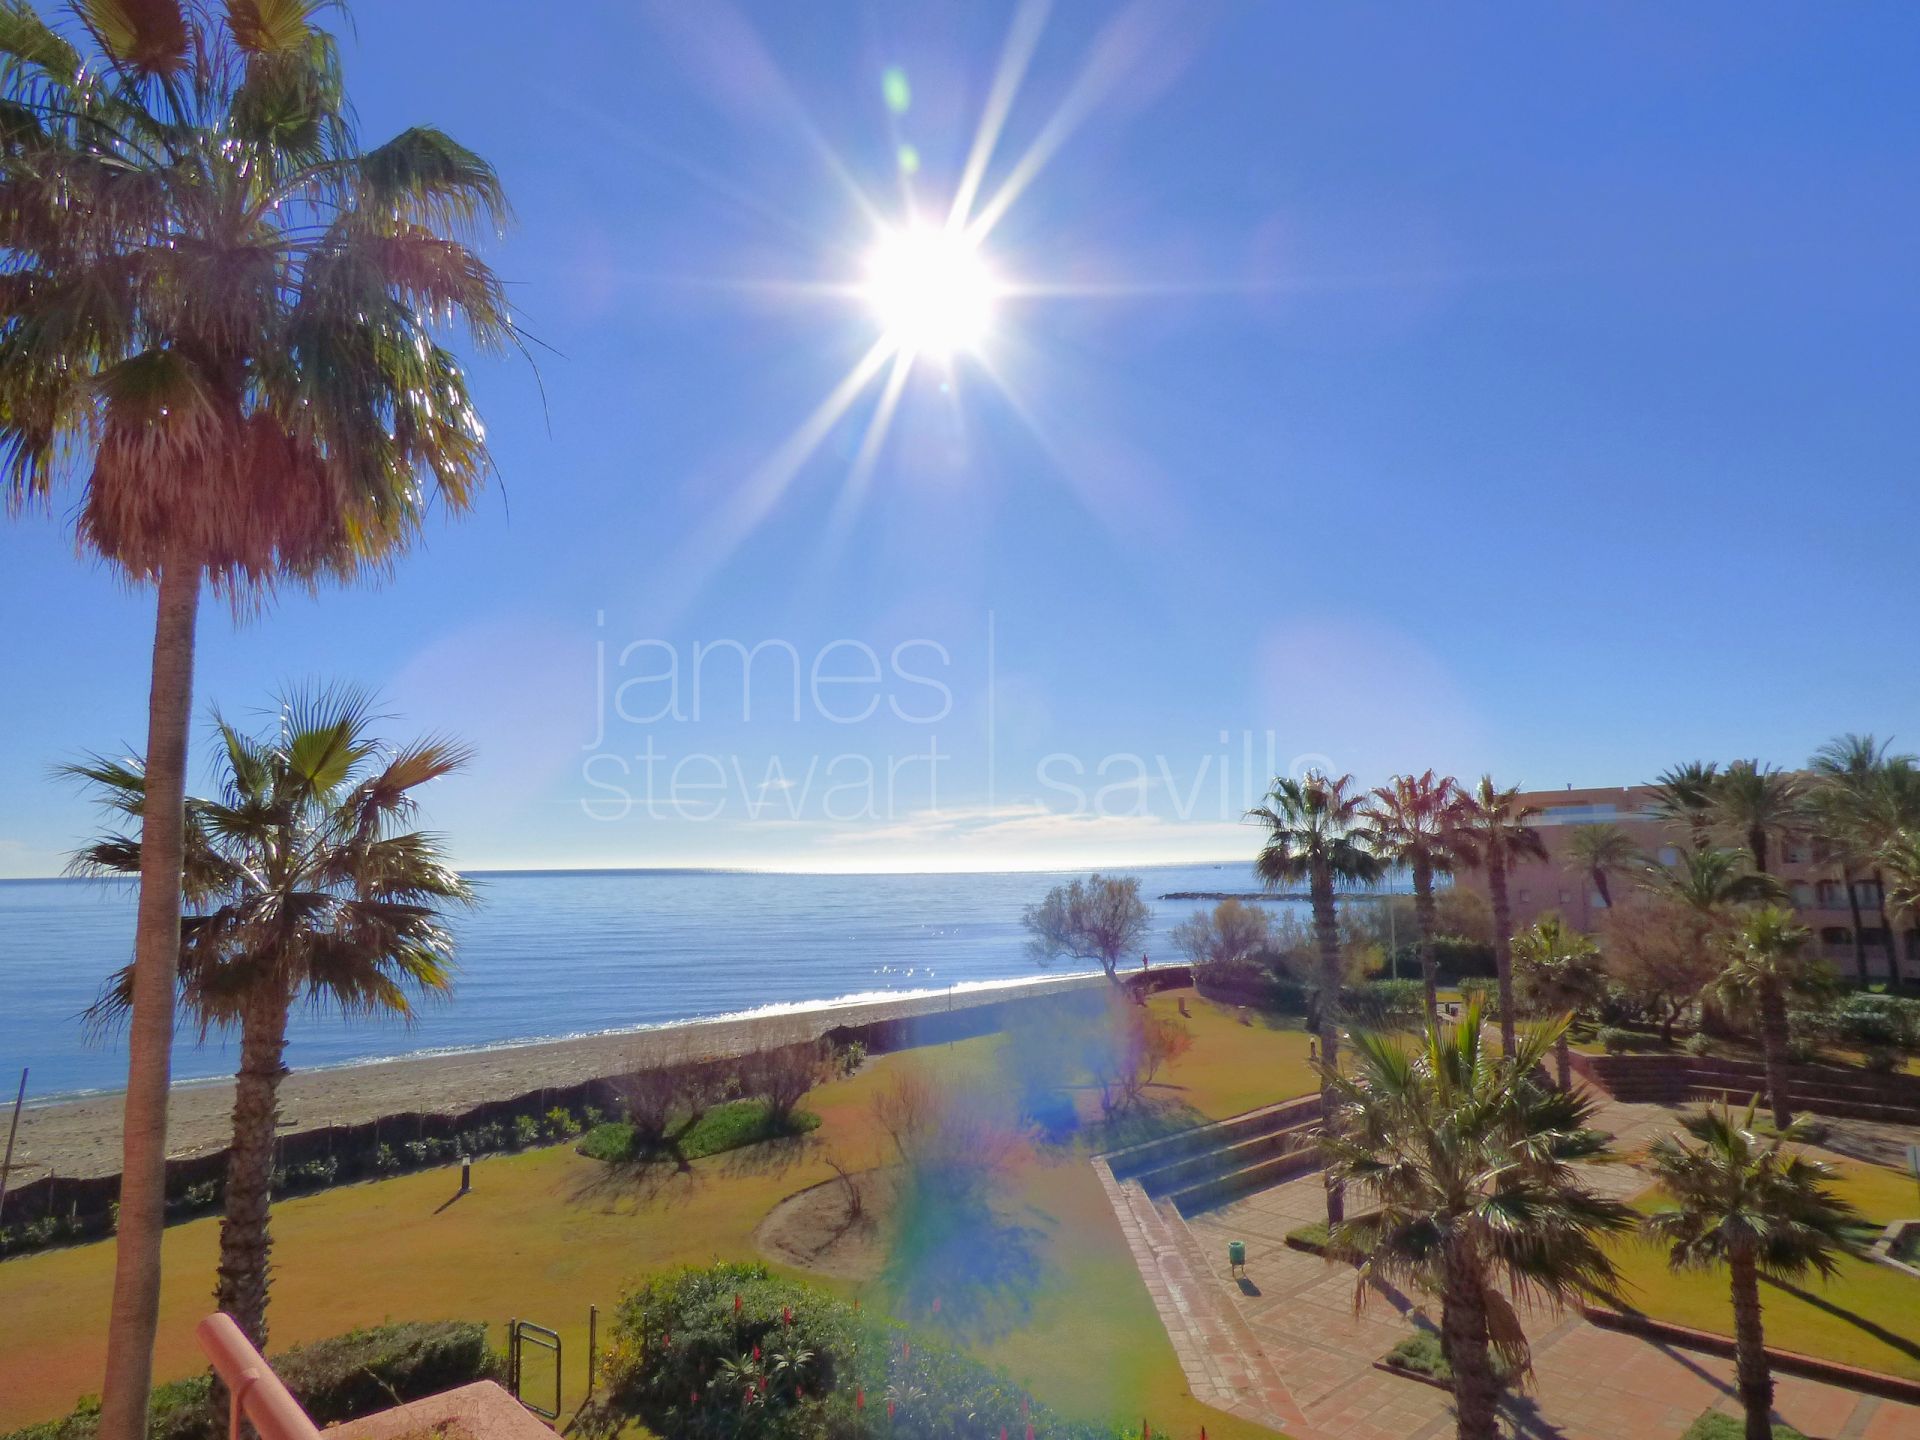 Excellent one bedroom beachfront apartment with garden only 30 metres from the beach